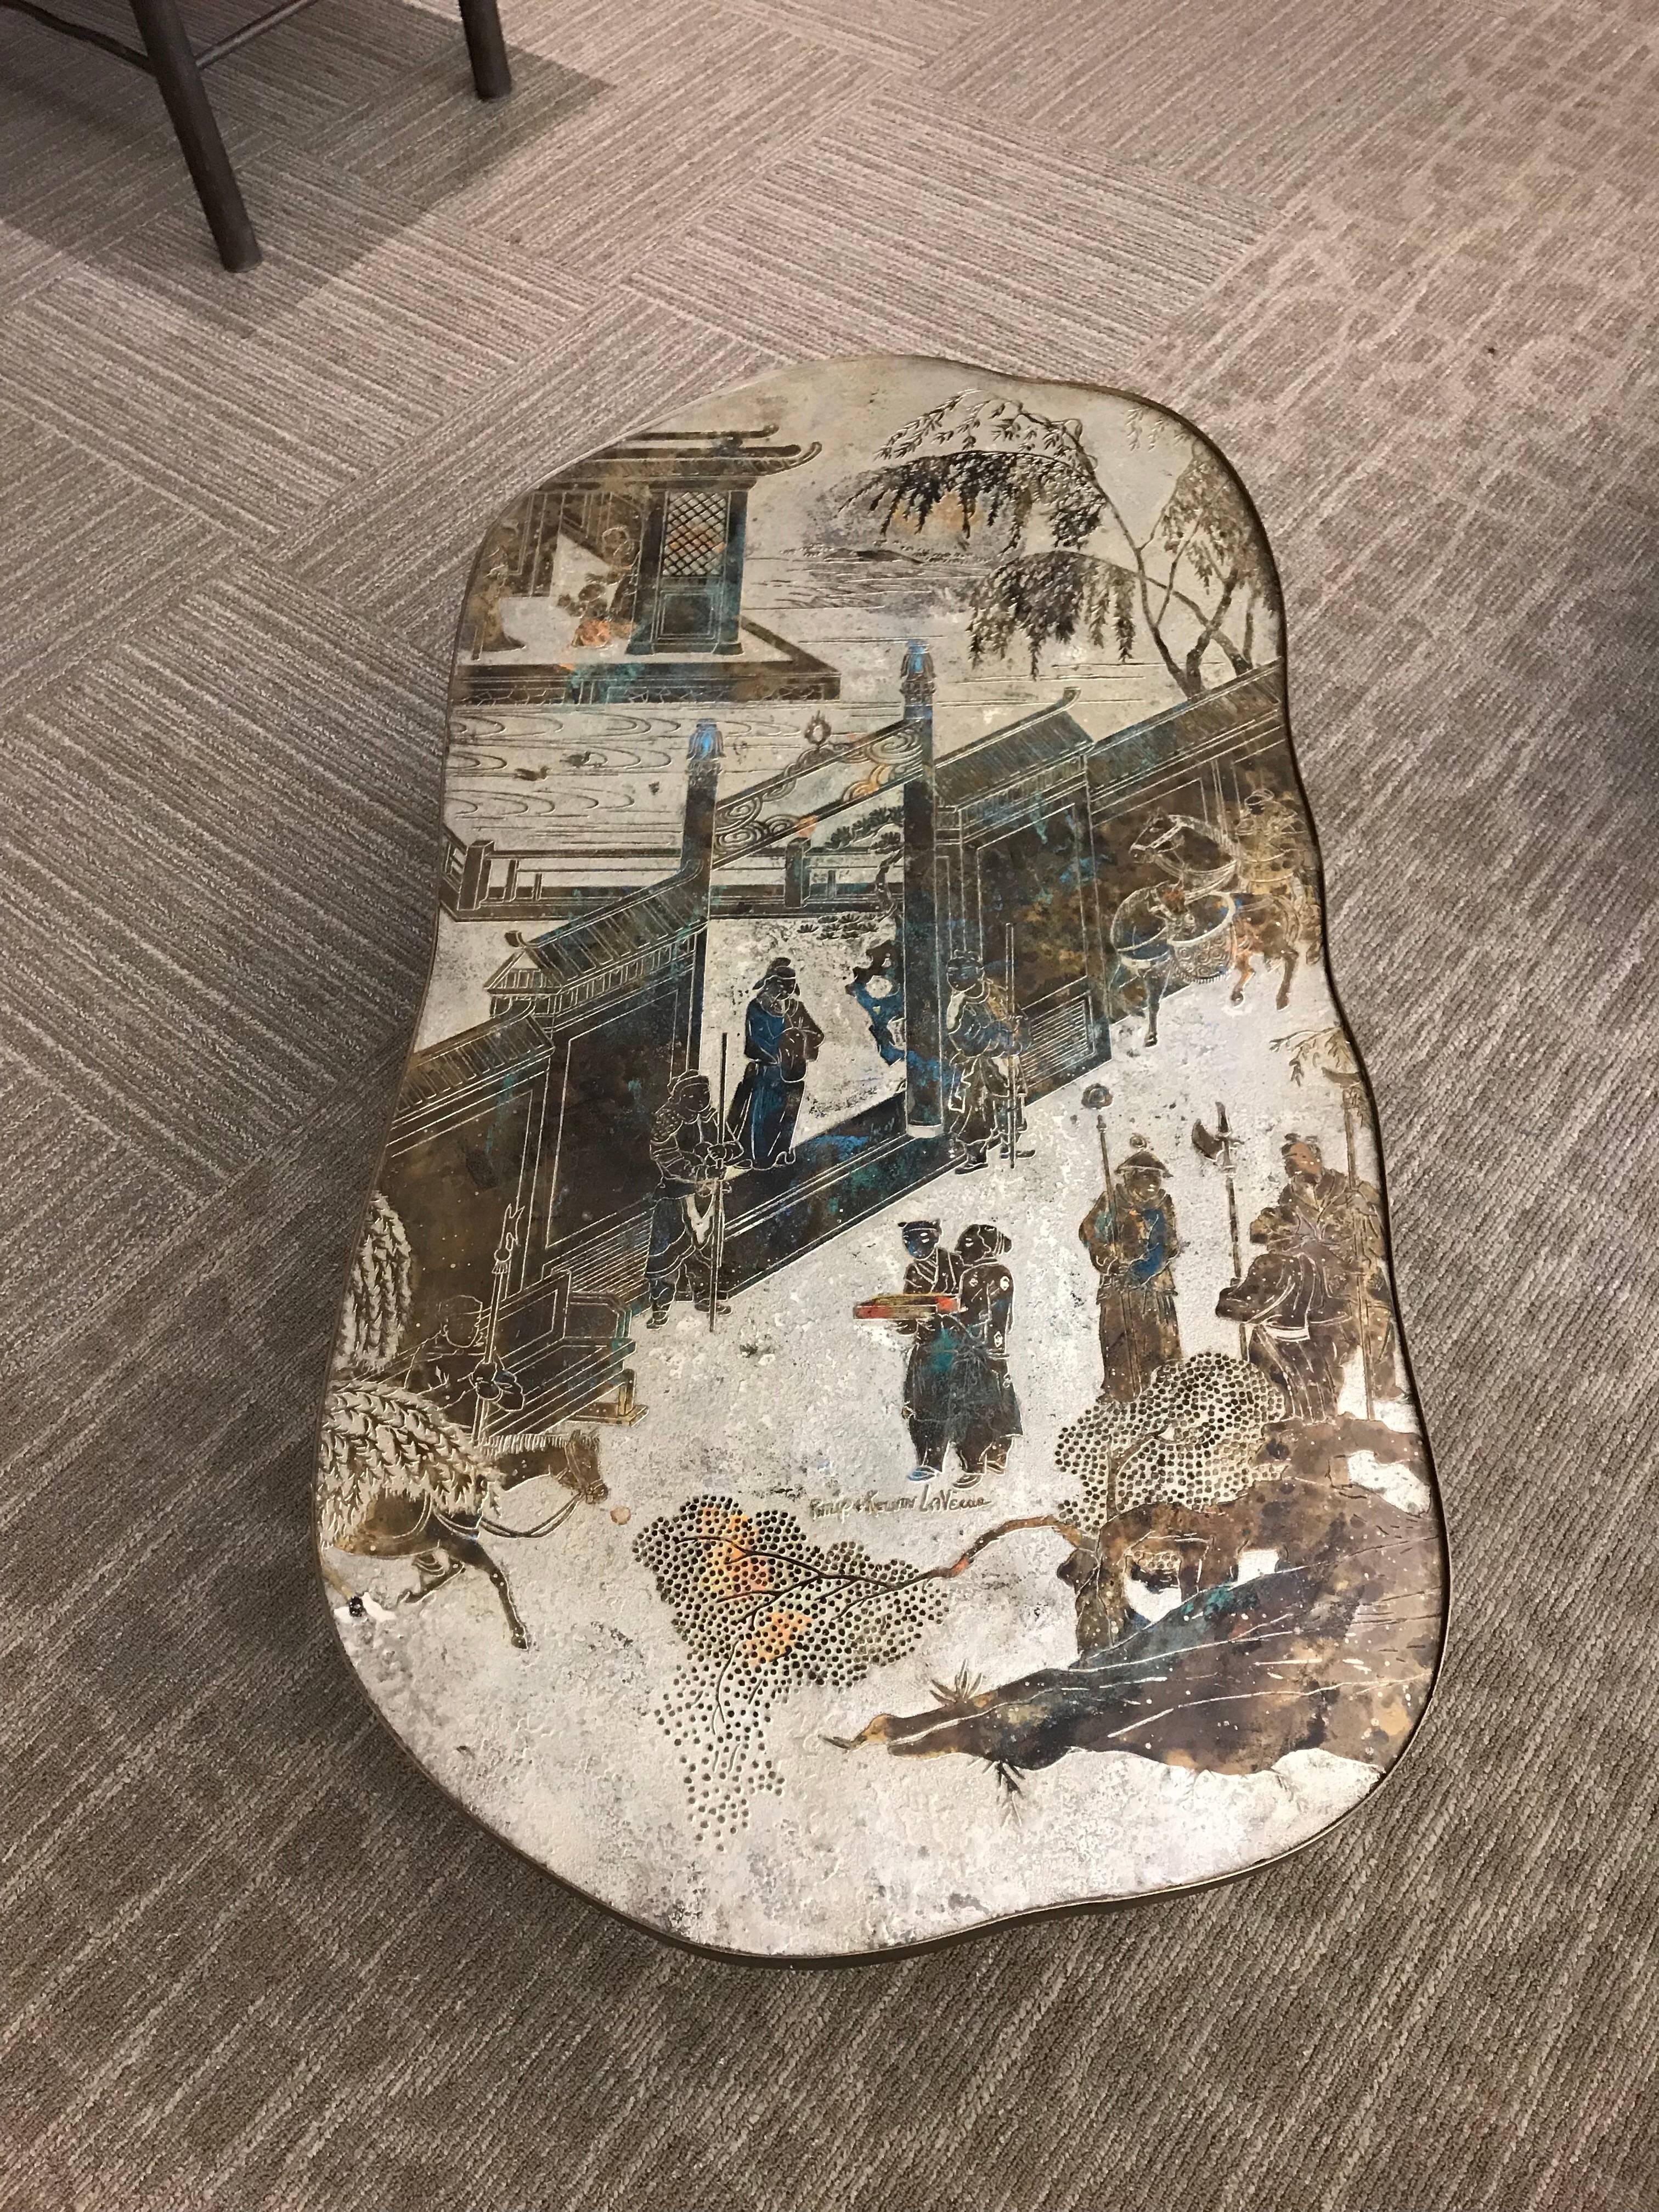 Organic shaped table by Philip and Kelvin LaVerne, circa 1970s, from the Chan series, with pavilions and figures in oxidized colors.